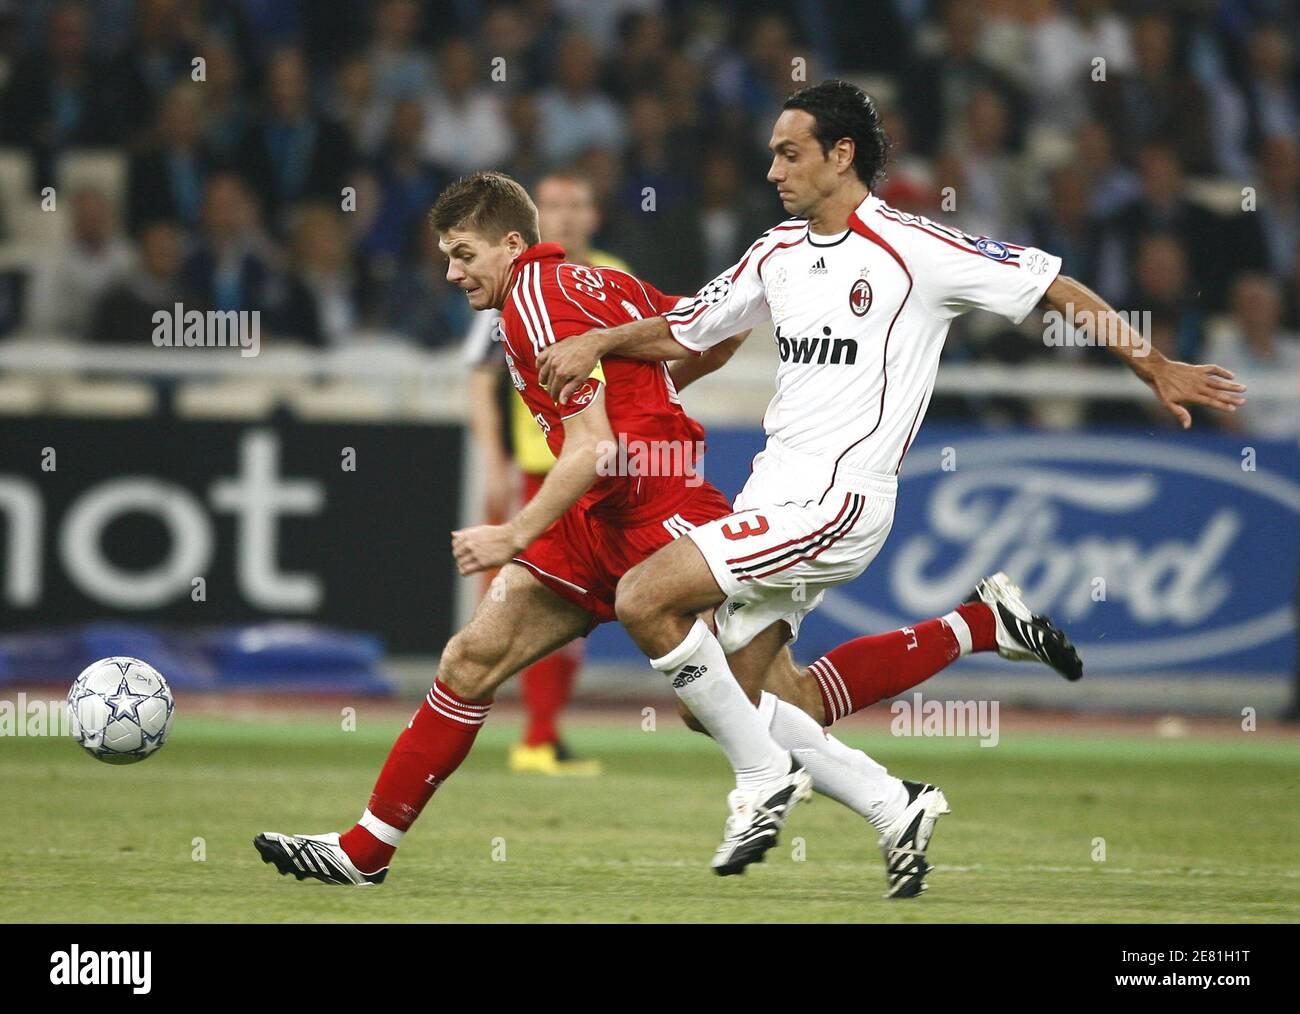 AC Milan's Alessandro Nesta and Liverpool's Steven Gerrad battle for the ball during the UEFA Champions League Final, AC Milan v Liverpool at Olympic Stadium, in Athens, Greece, on May 23, 2007. AC Milan won 2-1. Photo by Christian Liewig/ABACAPRESS.COM Stock Photo